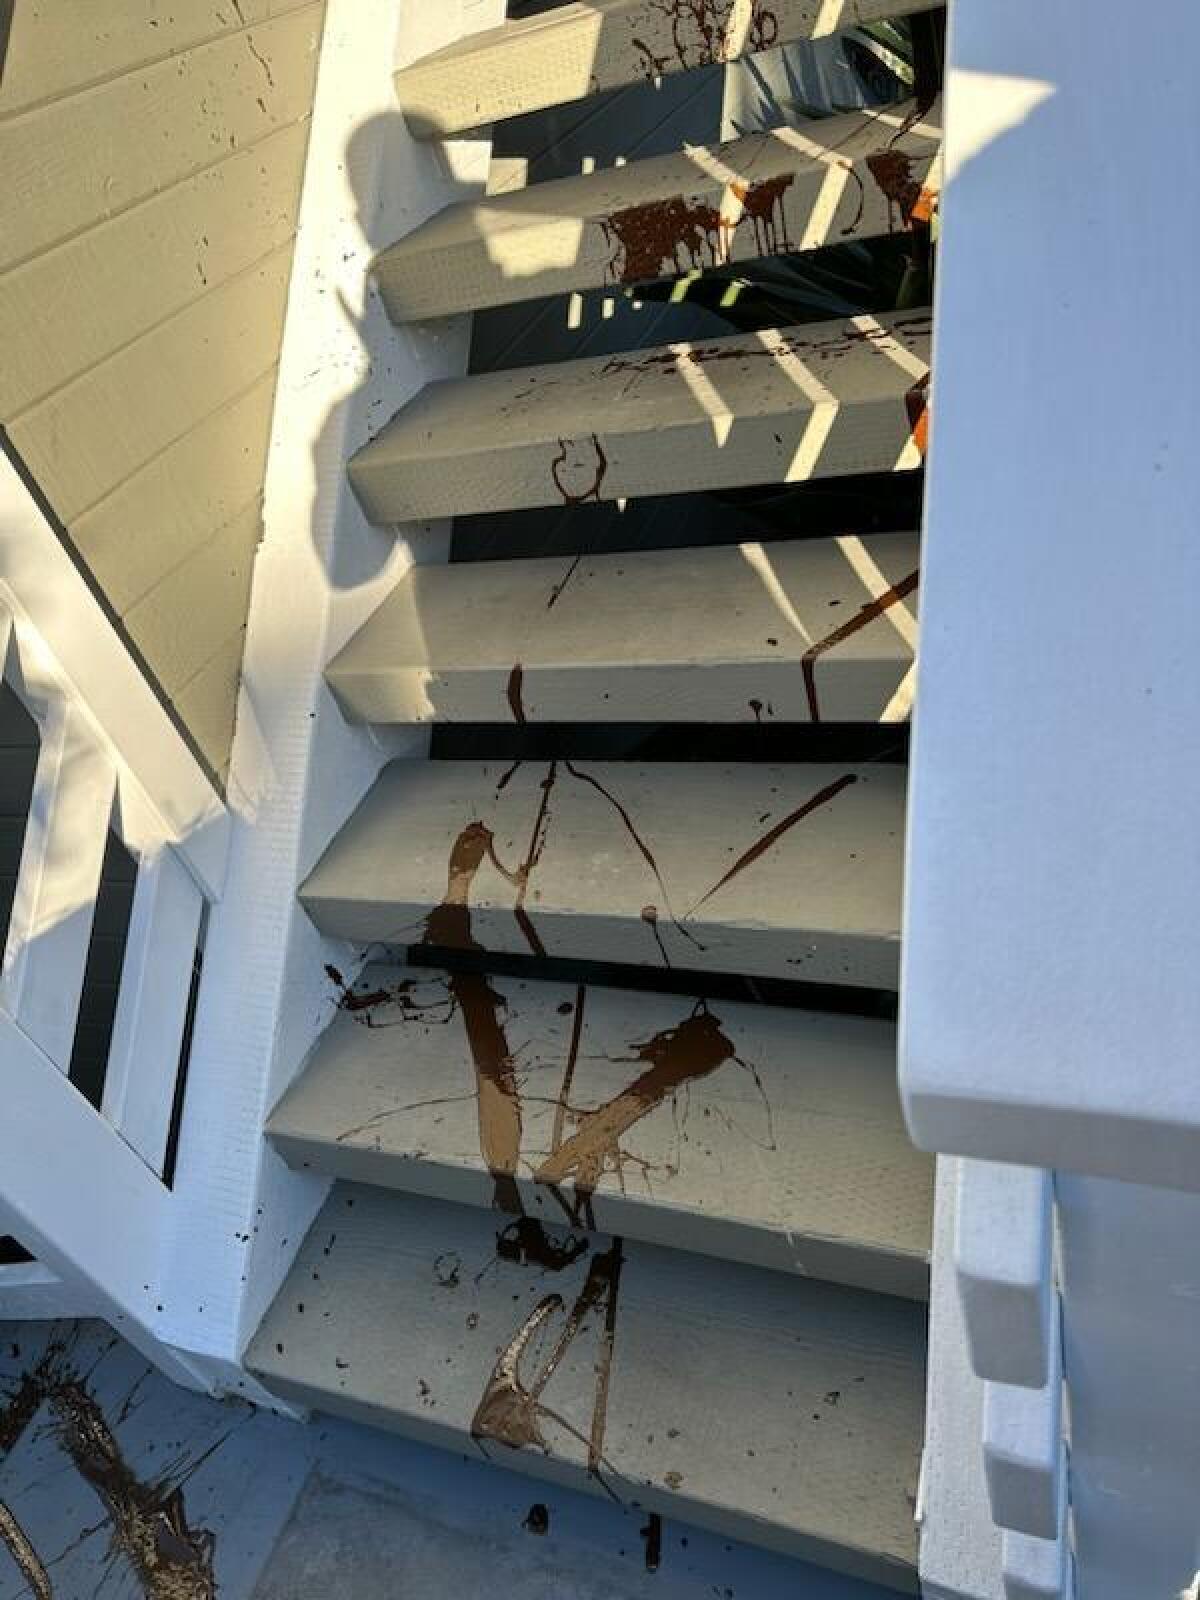 Sewage or feces was strewn over the stairs to Laguna Beach City Manager Shohreh Dupuis' residence last week.